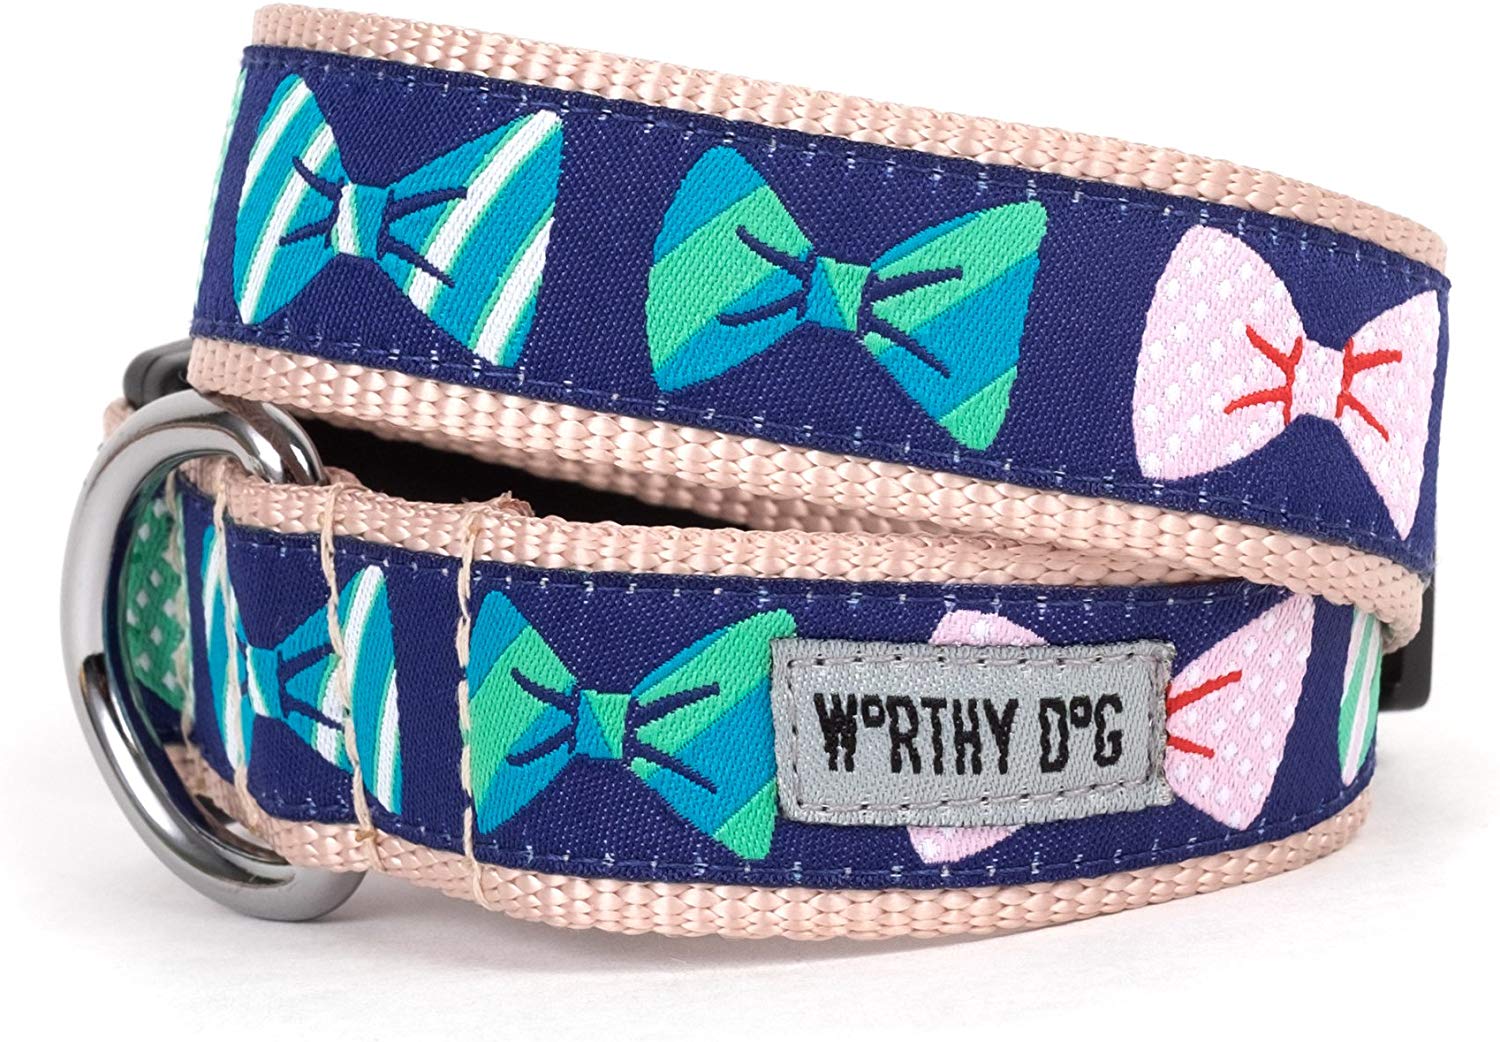 designer dog collars for small dogs